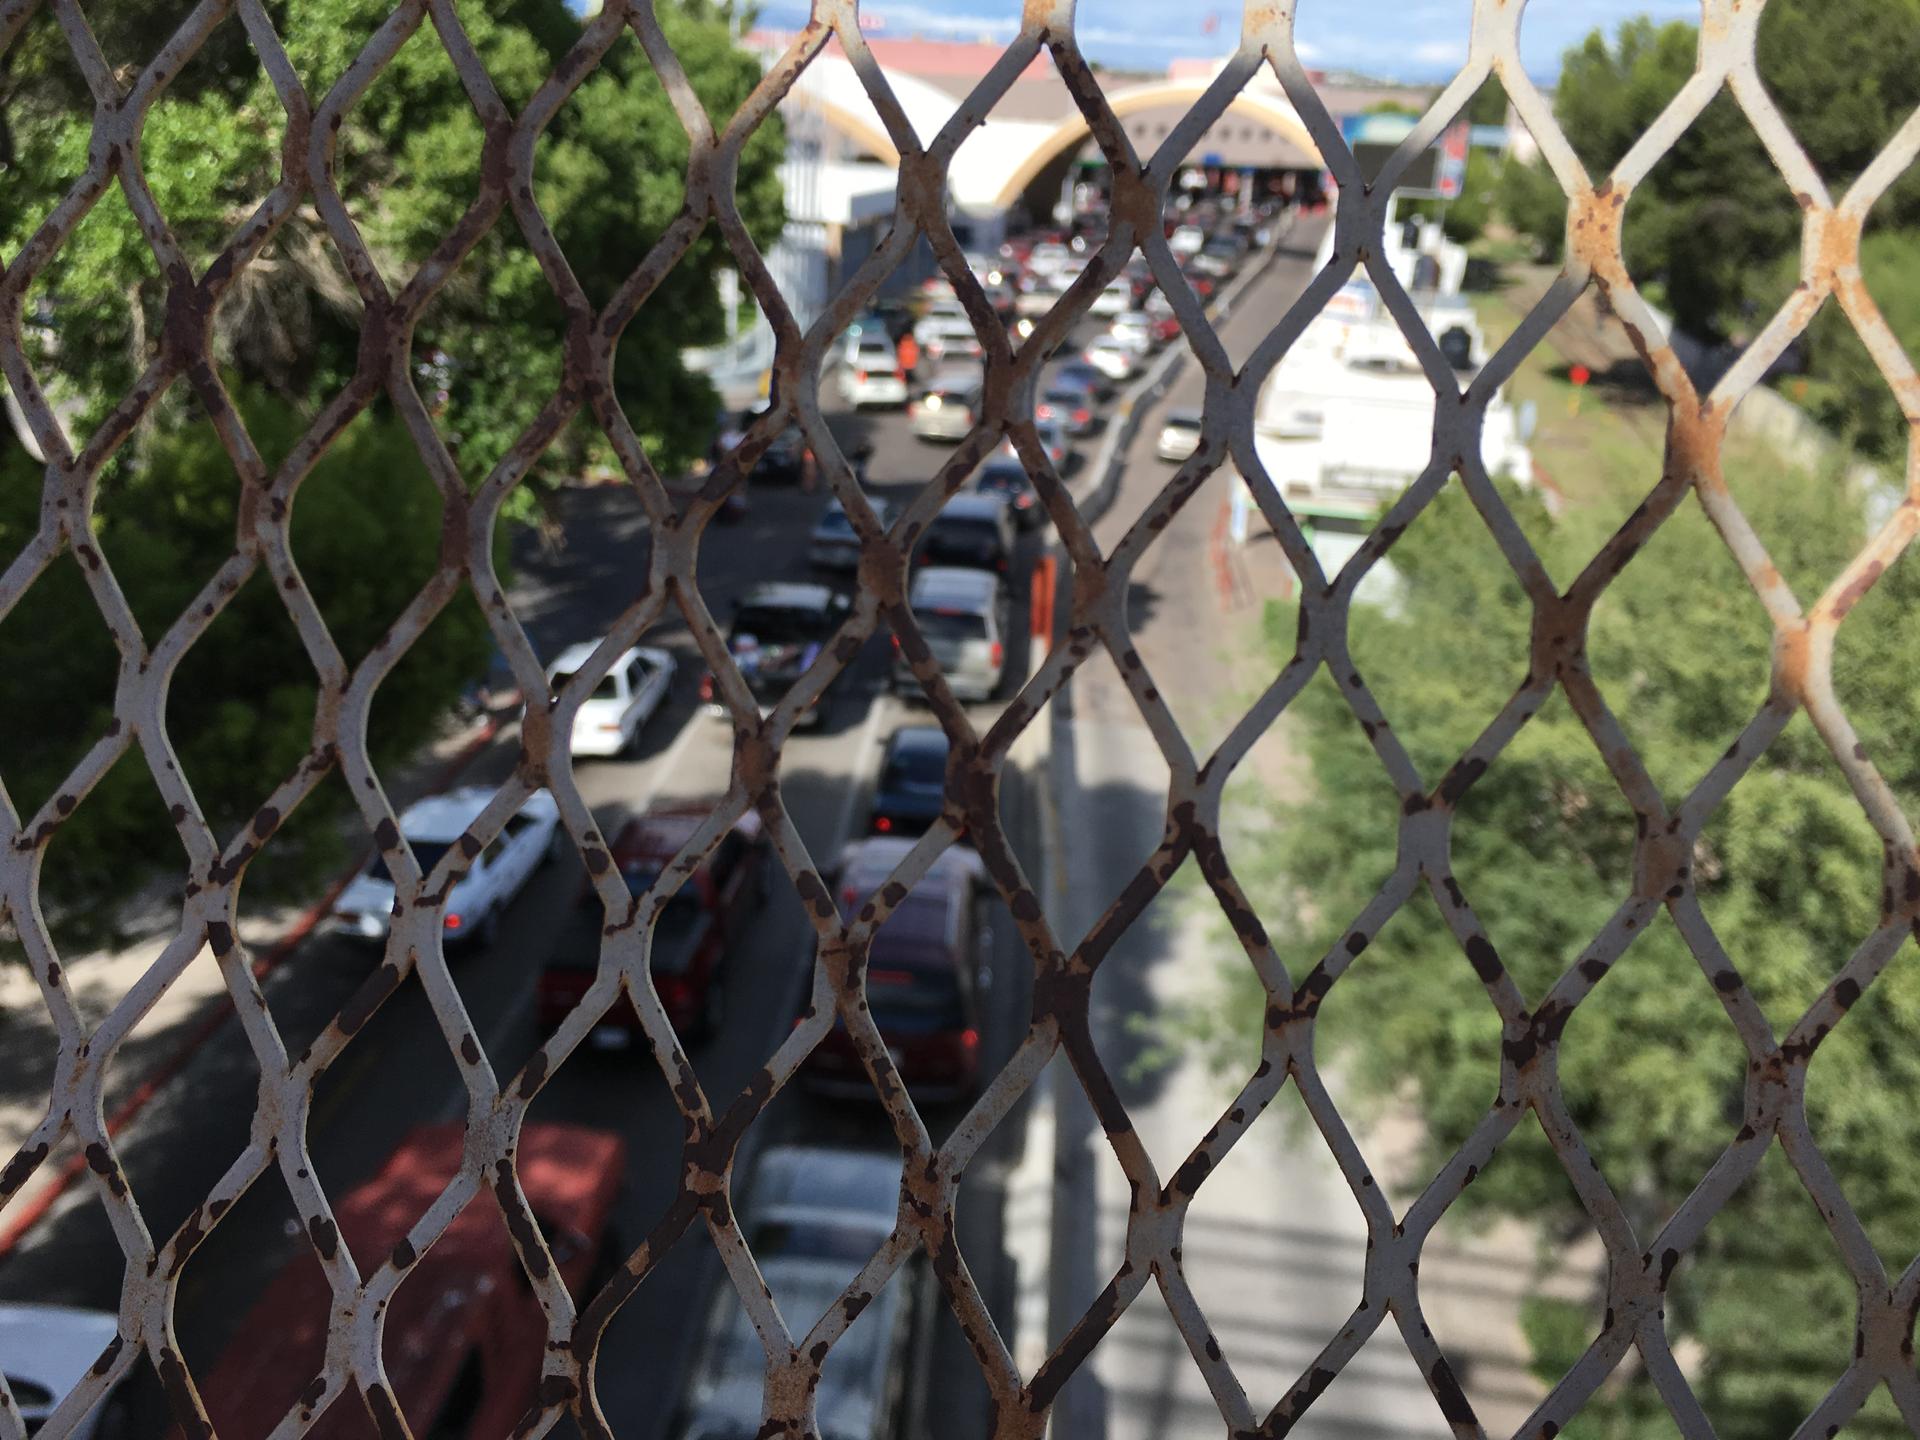 The view from Mexico to the US at the Nogales point of entry.